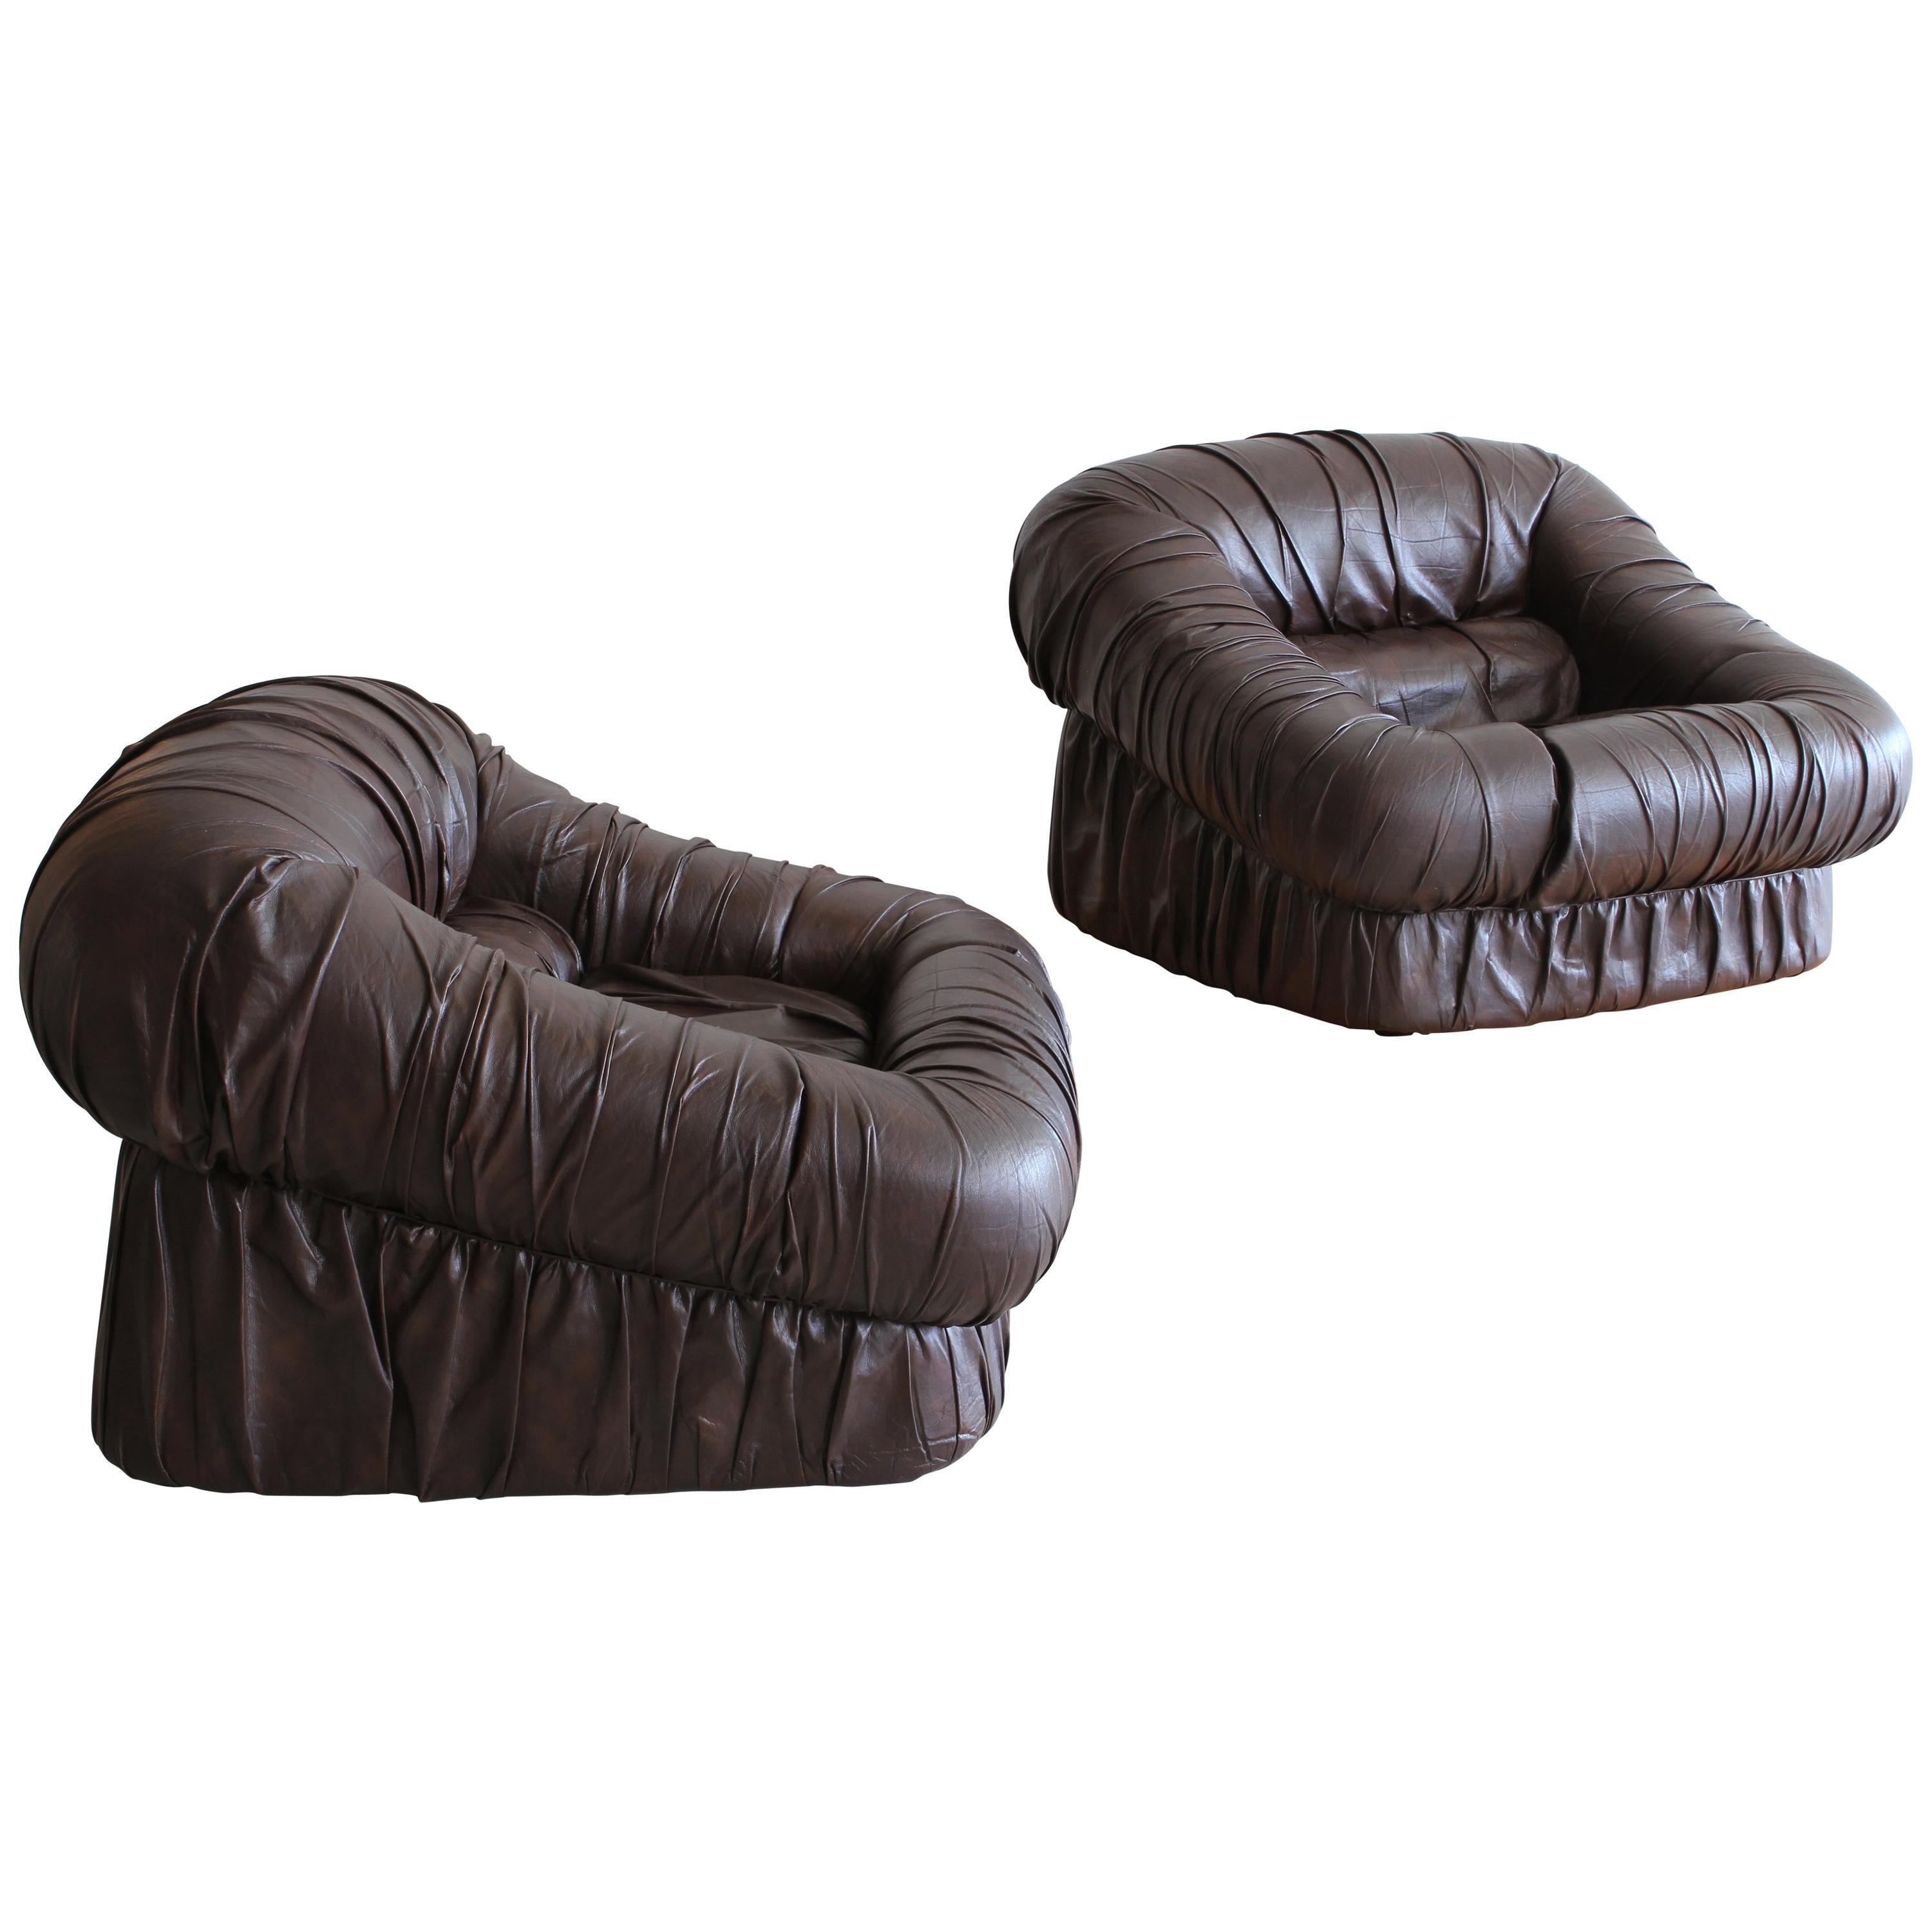 Pair of Leather Club Chairs by De Pas, D'urbino and Lomazzi